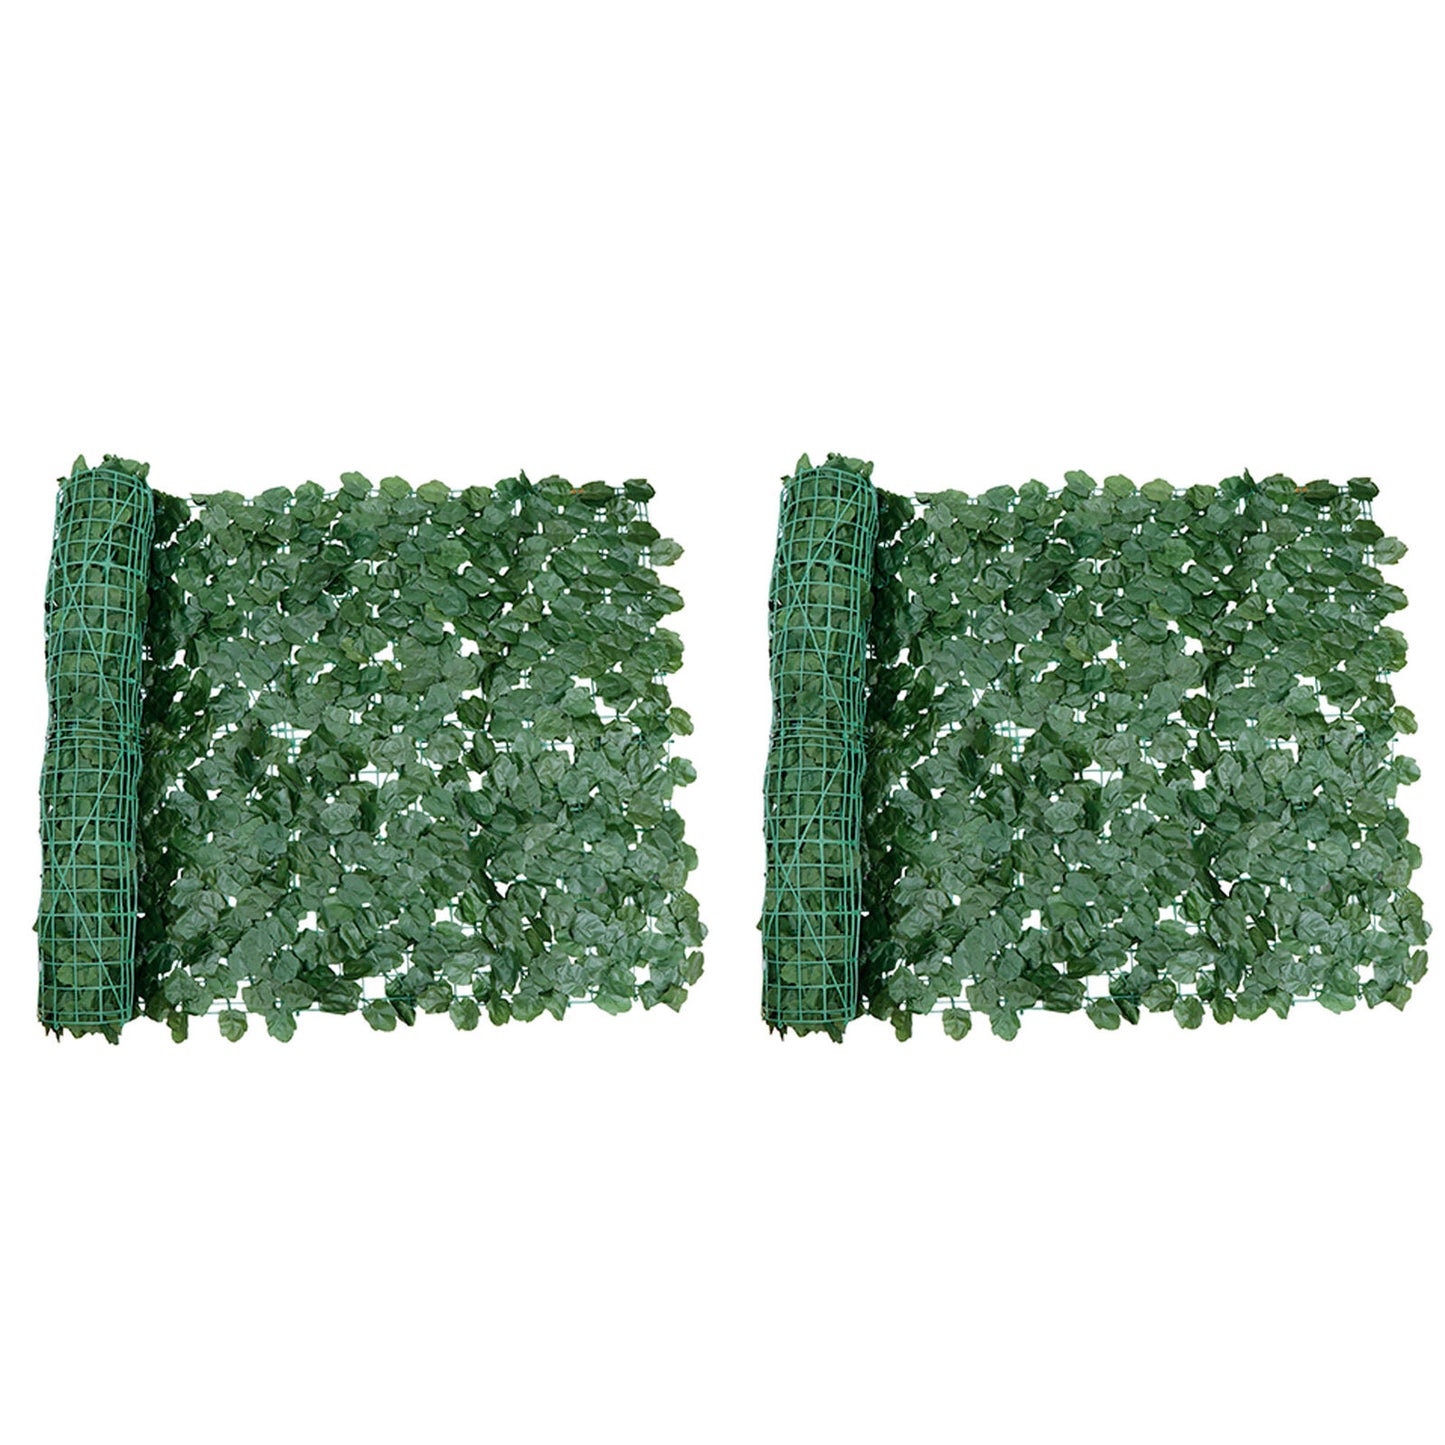 Privacy Fence Screen Artificial 98"X39" Faux Ivy Hedge Fencing Outdoor Decor X4